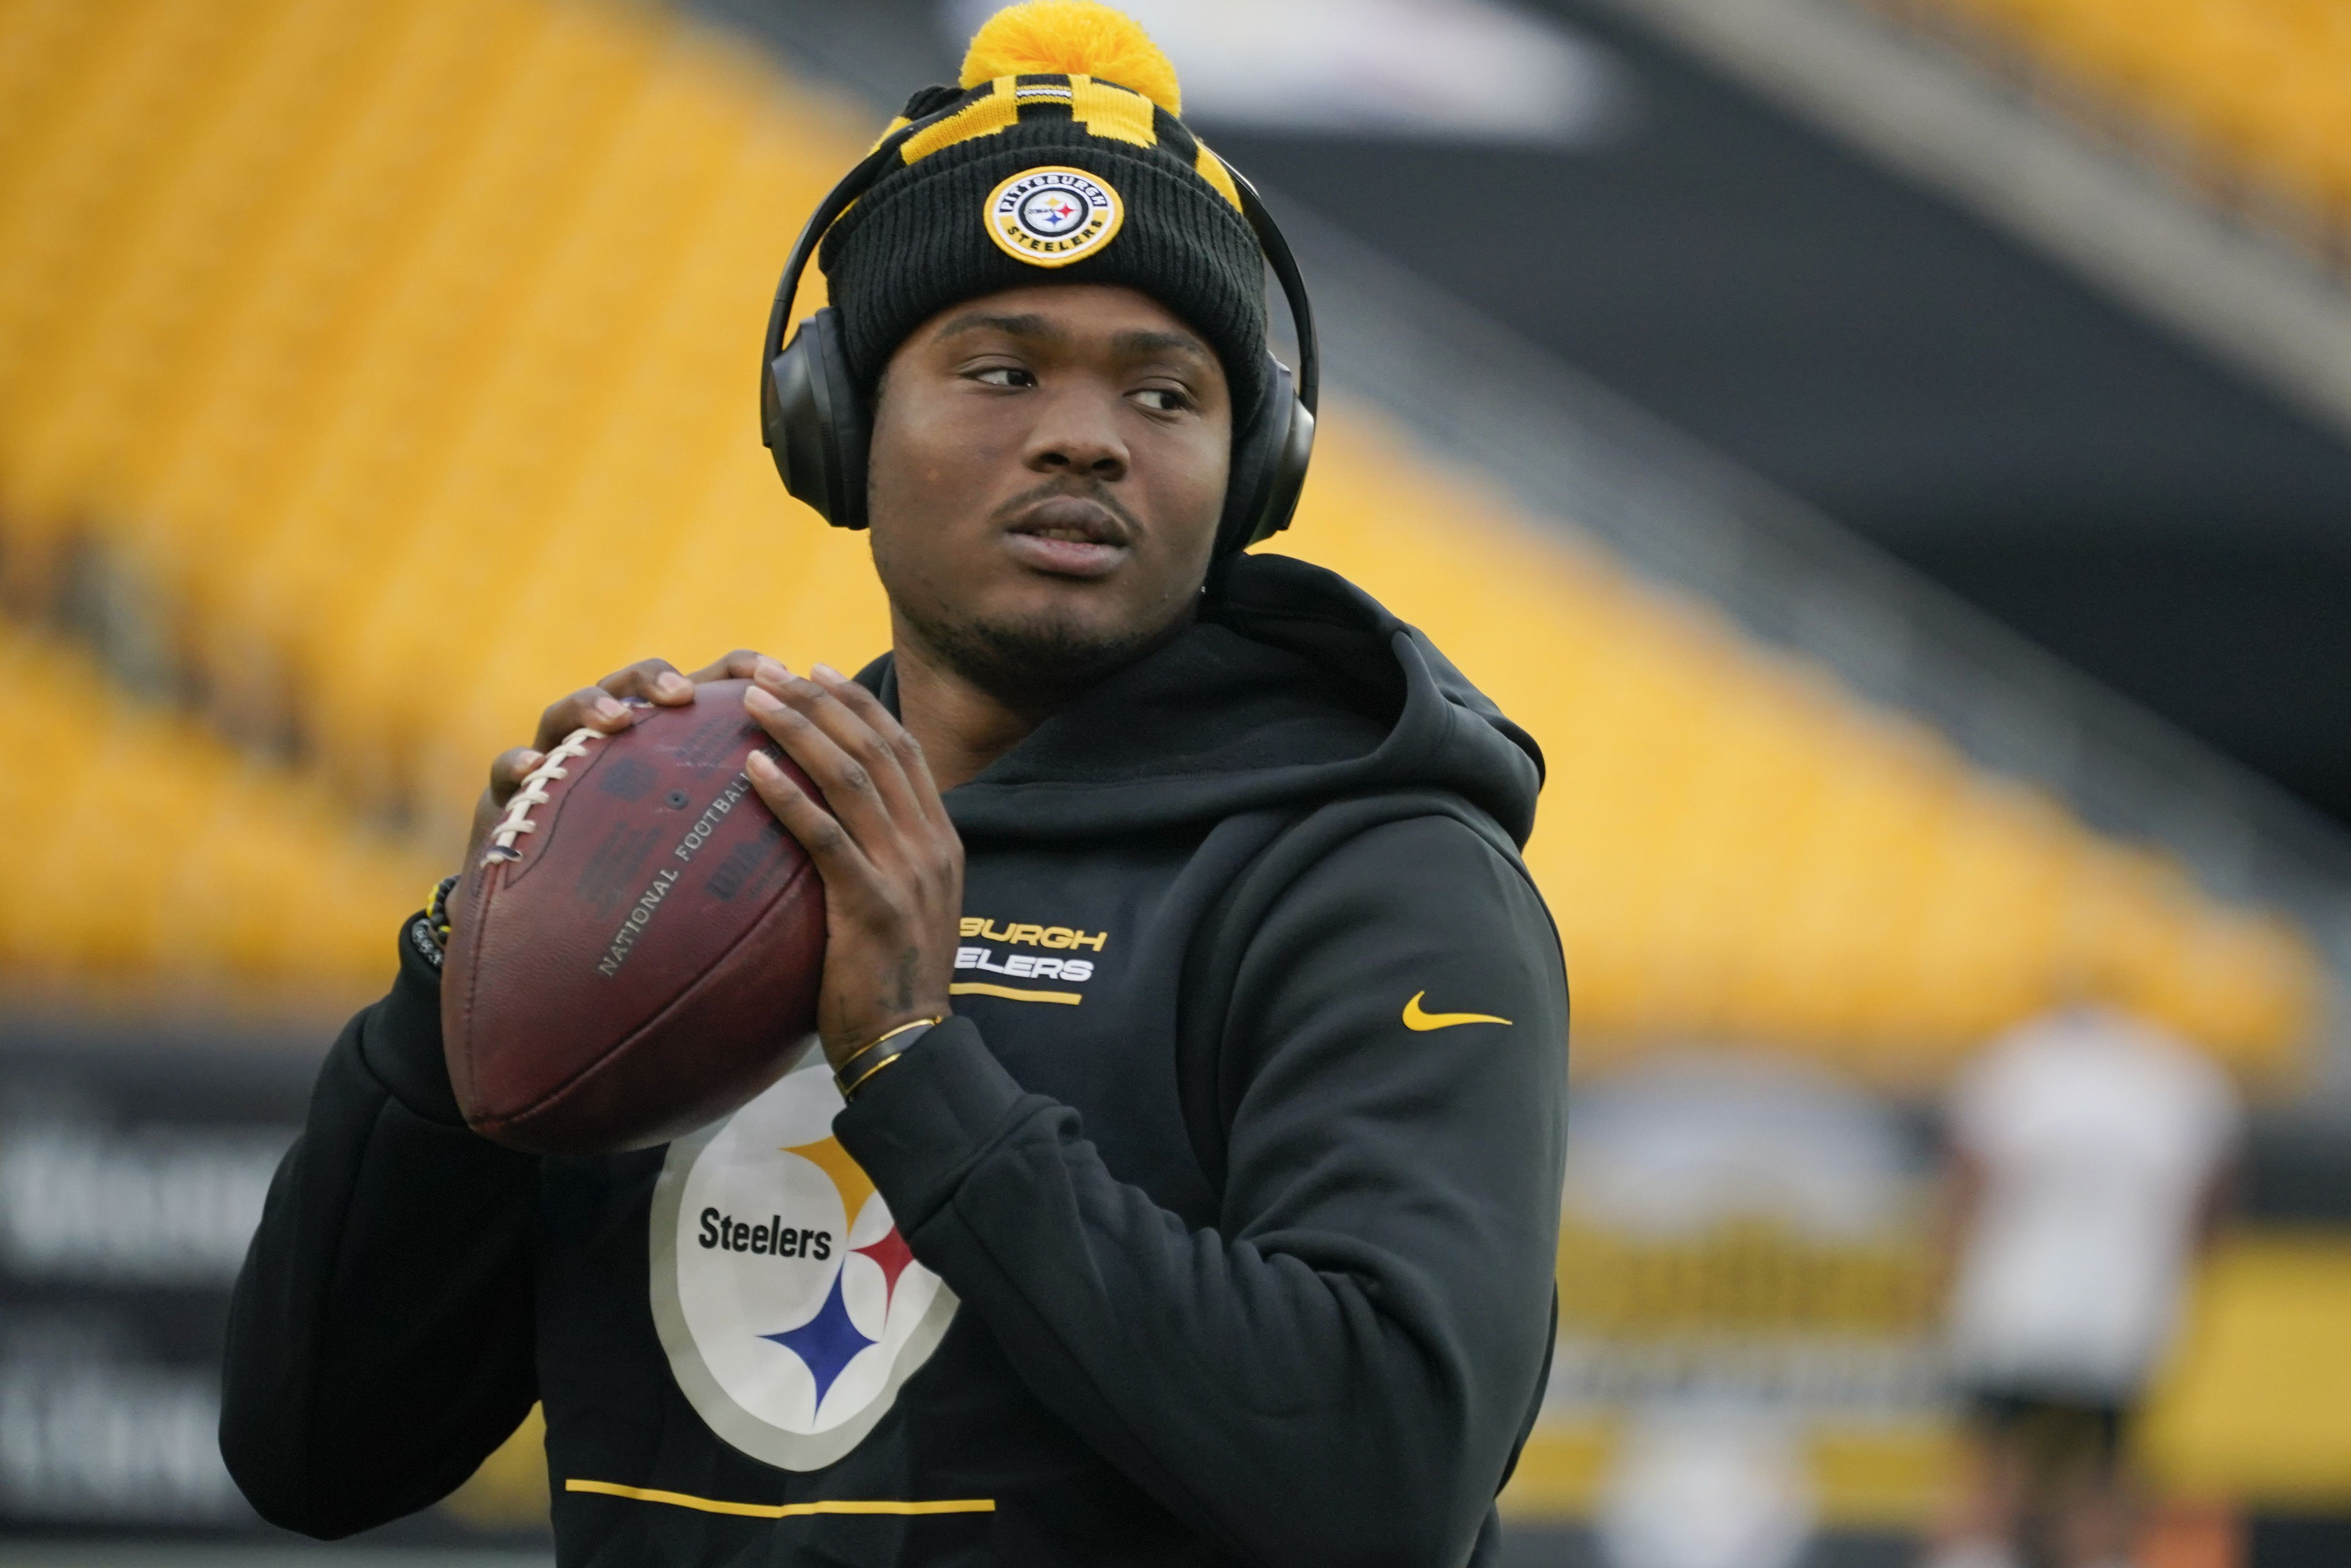 Dwayne Haskins death: Steelers quarterback had blood alcohol level more  than twice the legal limit when he was fatally hit, report says